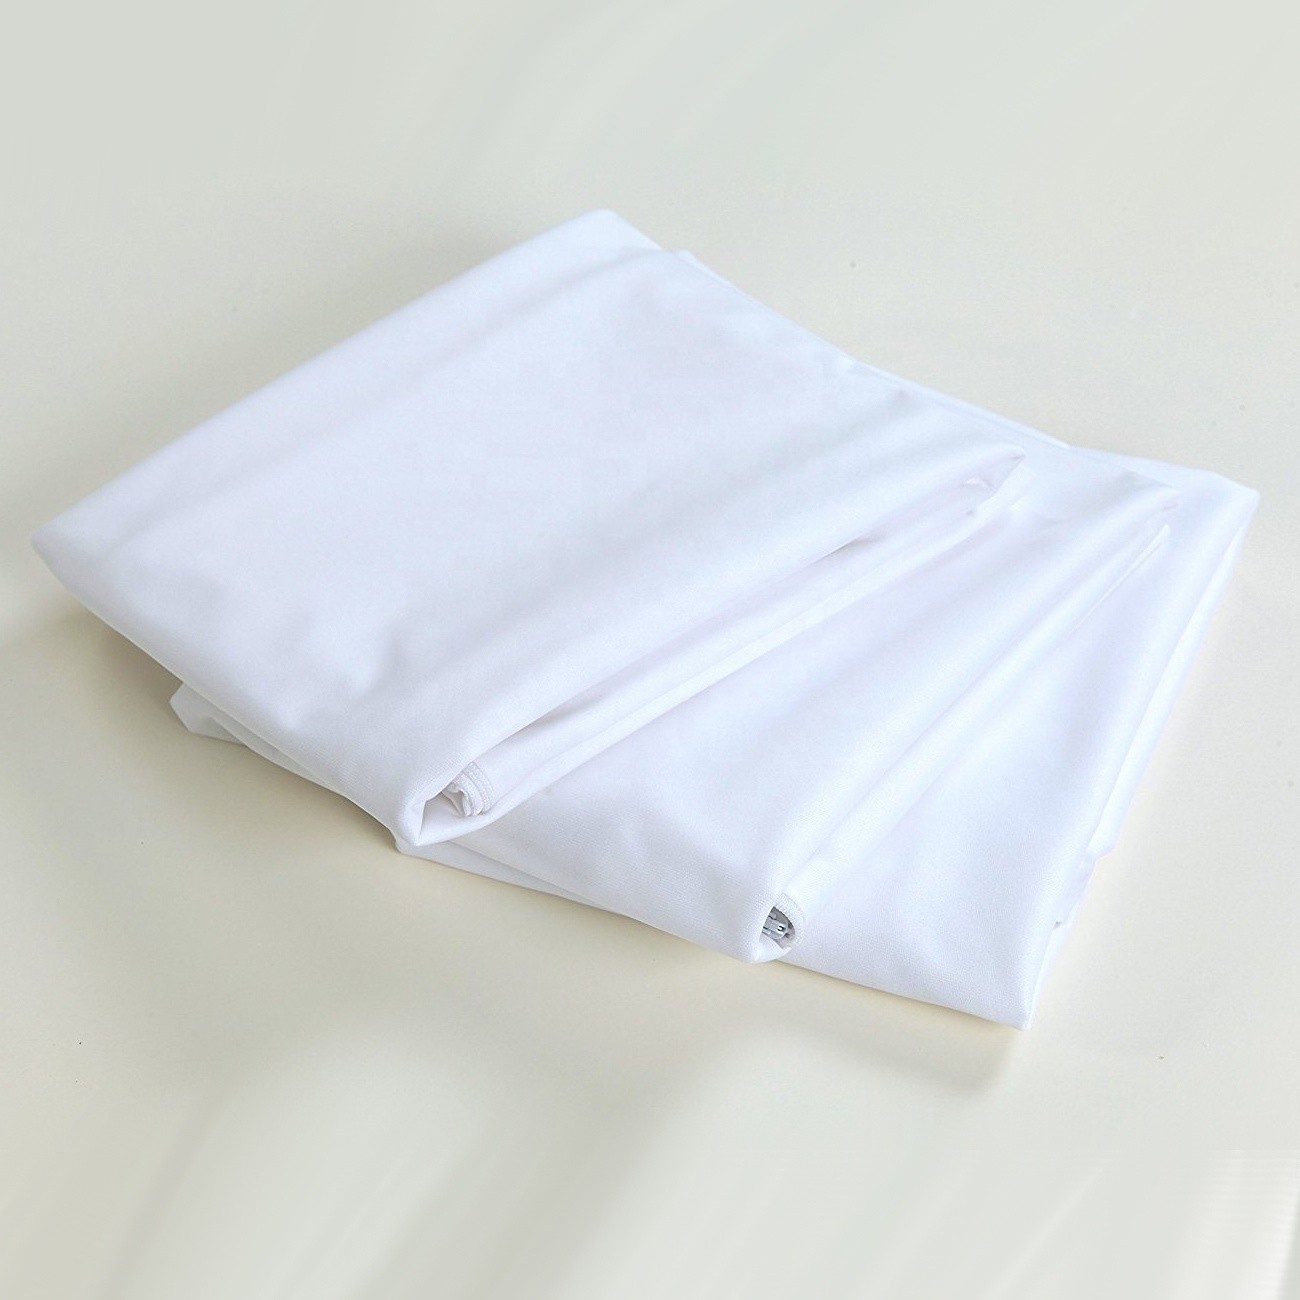 90gsm 100% Polyester Knitted with TPU Waterproof Pillowcase